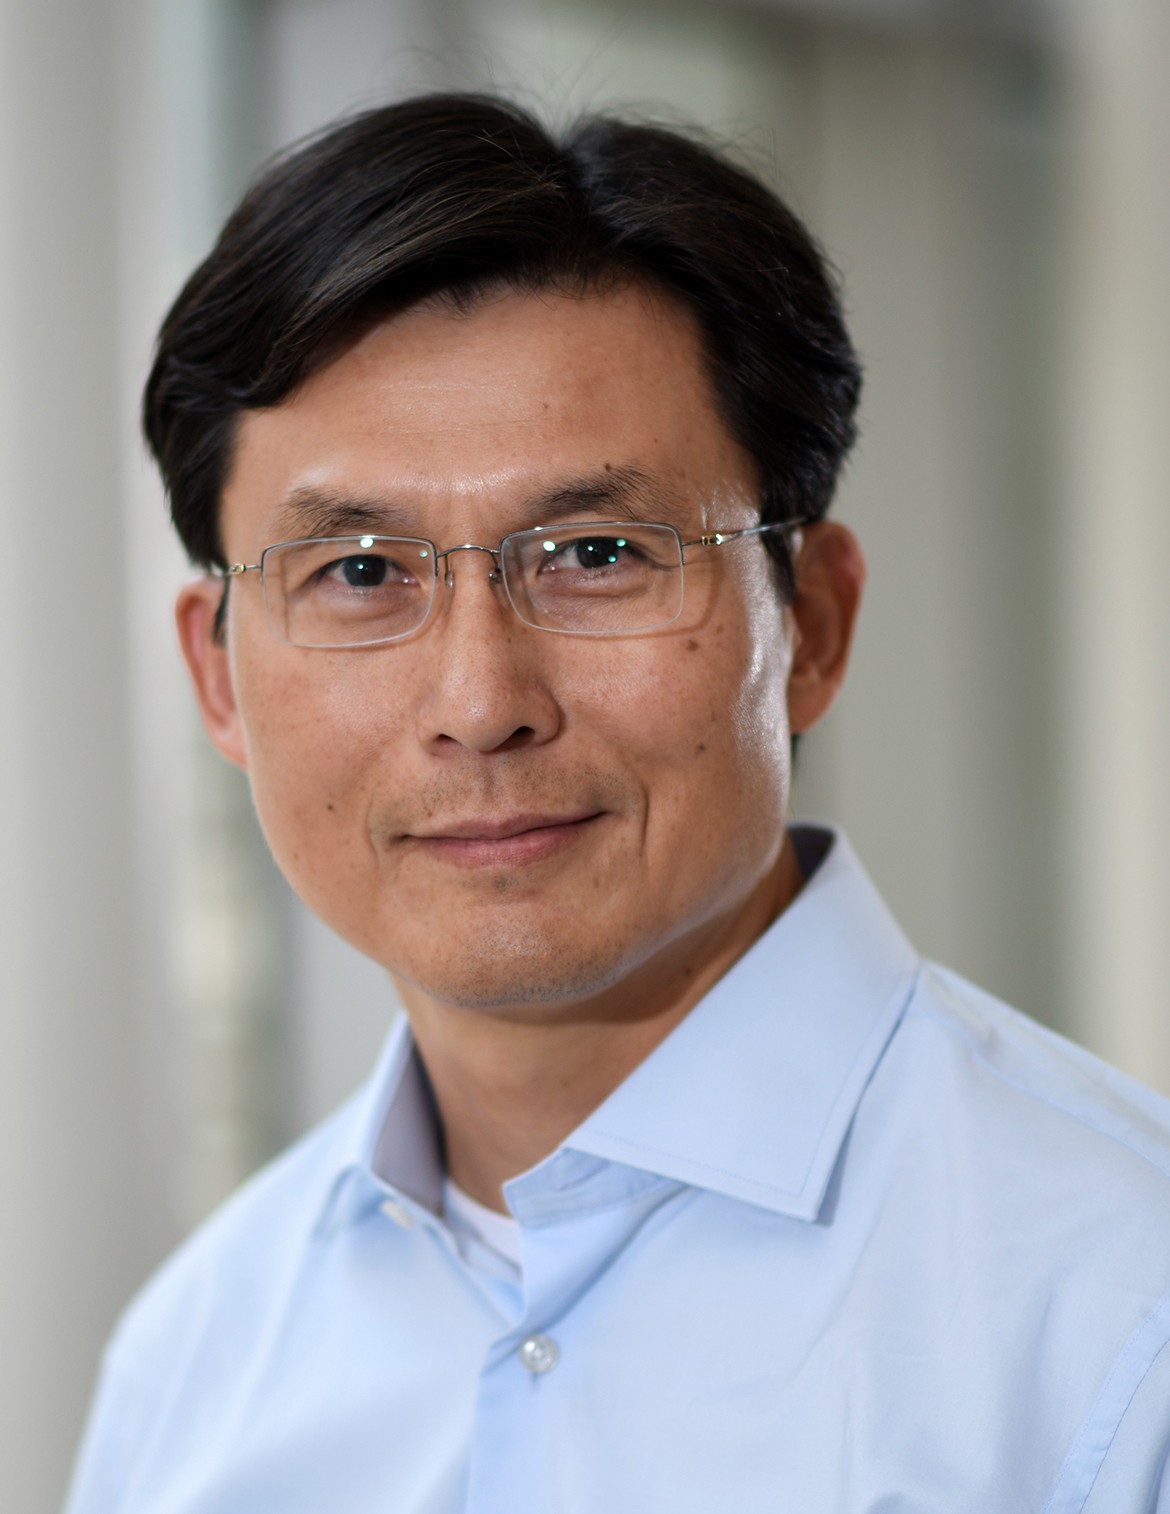 Dr. Ming Zhou is pictured